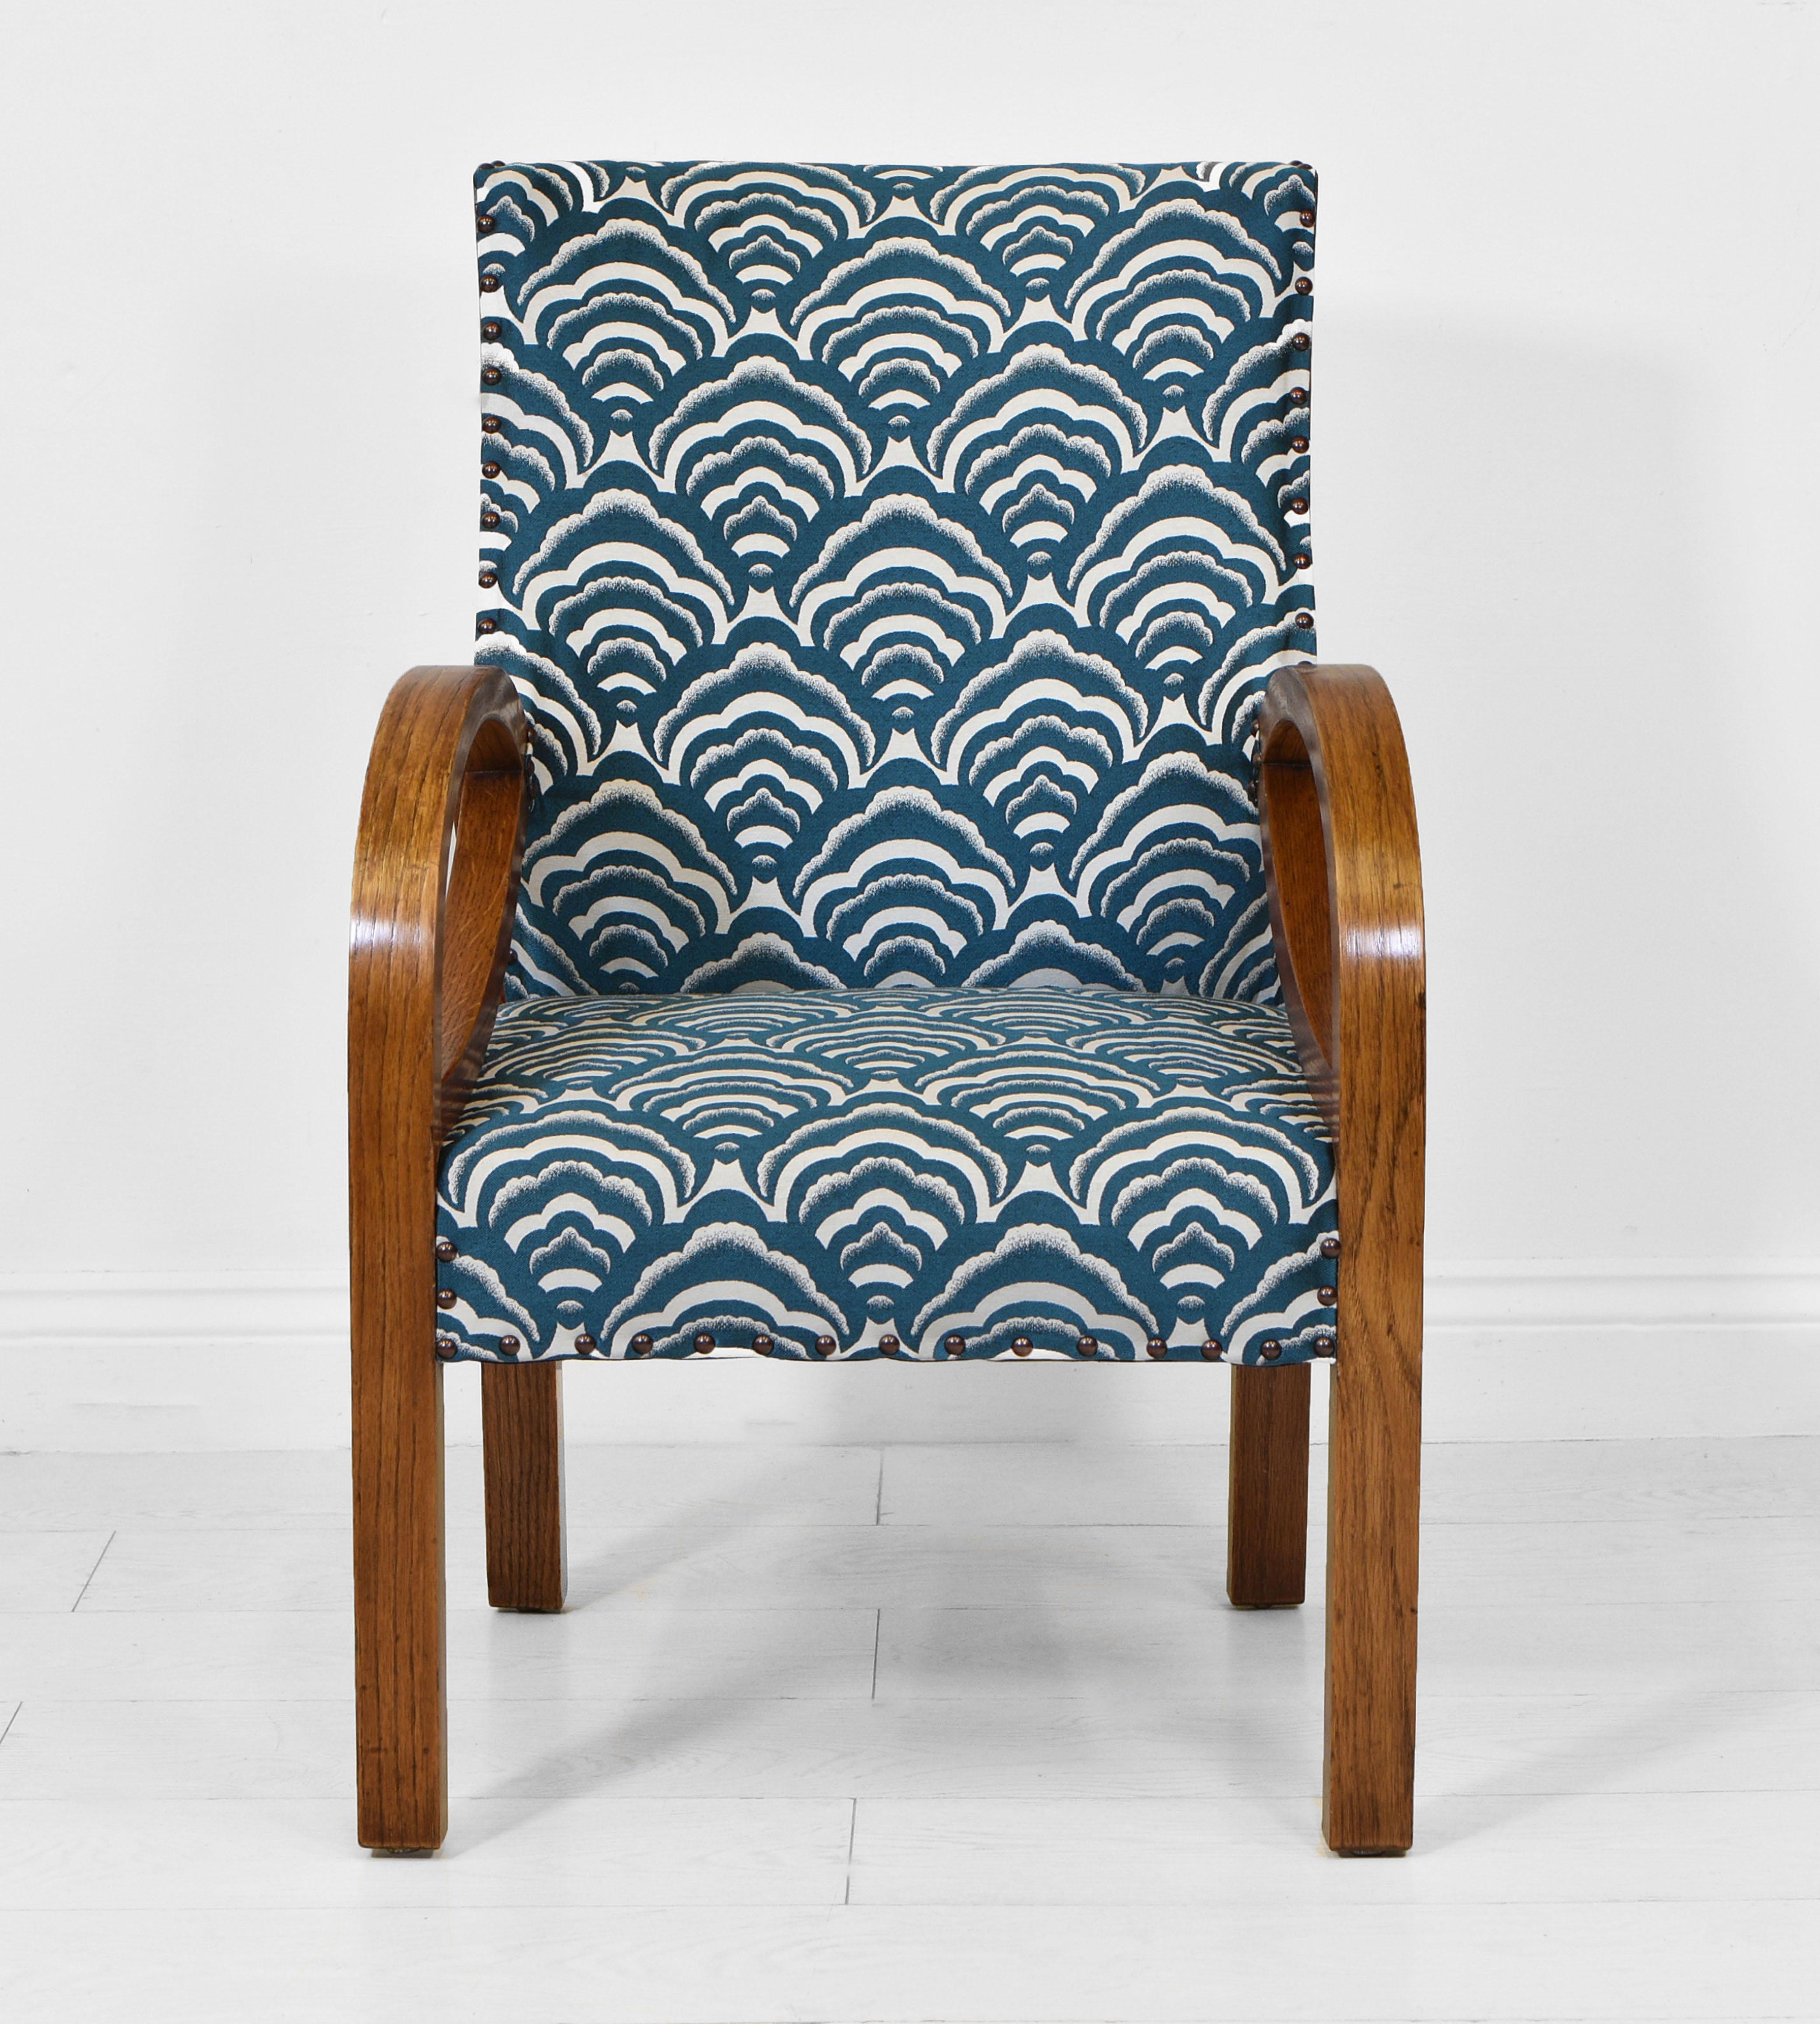 British Art Deco Bent Oak Small Armchair Upholstered in a Teal Cloud Form Fabric For Sale